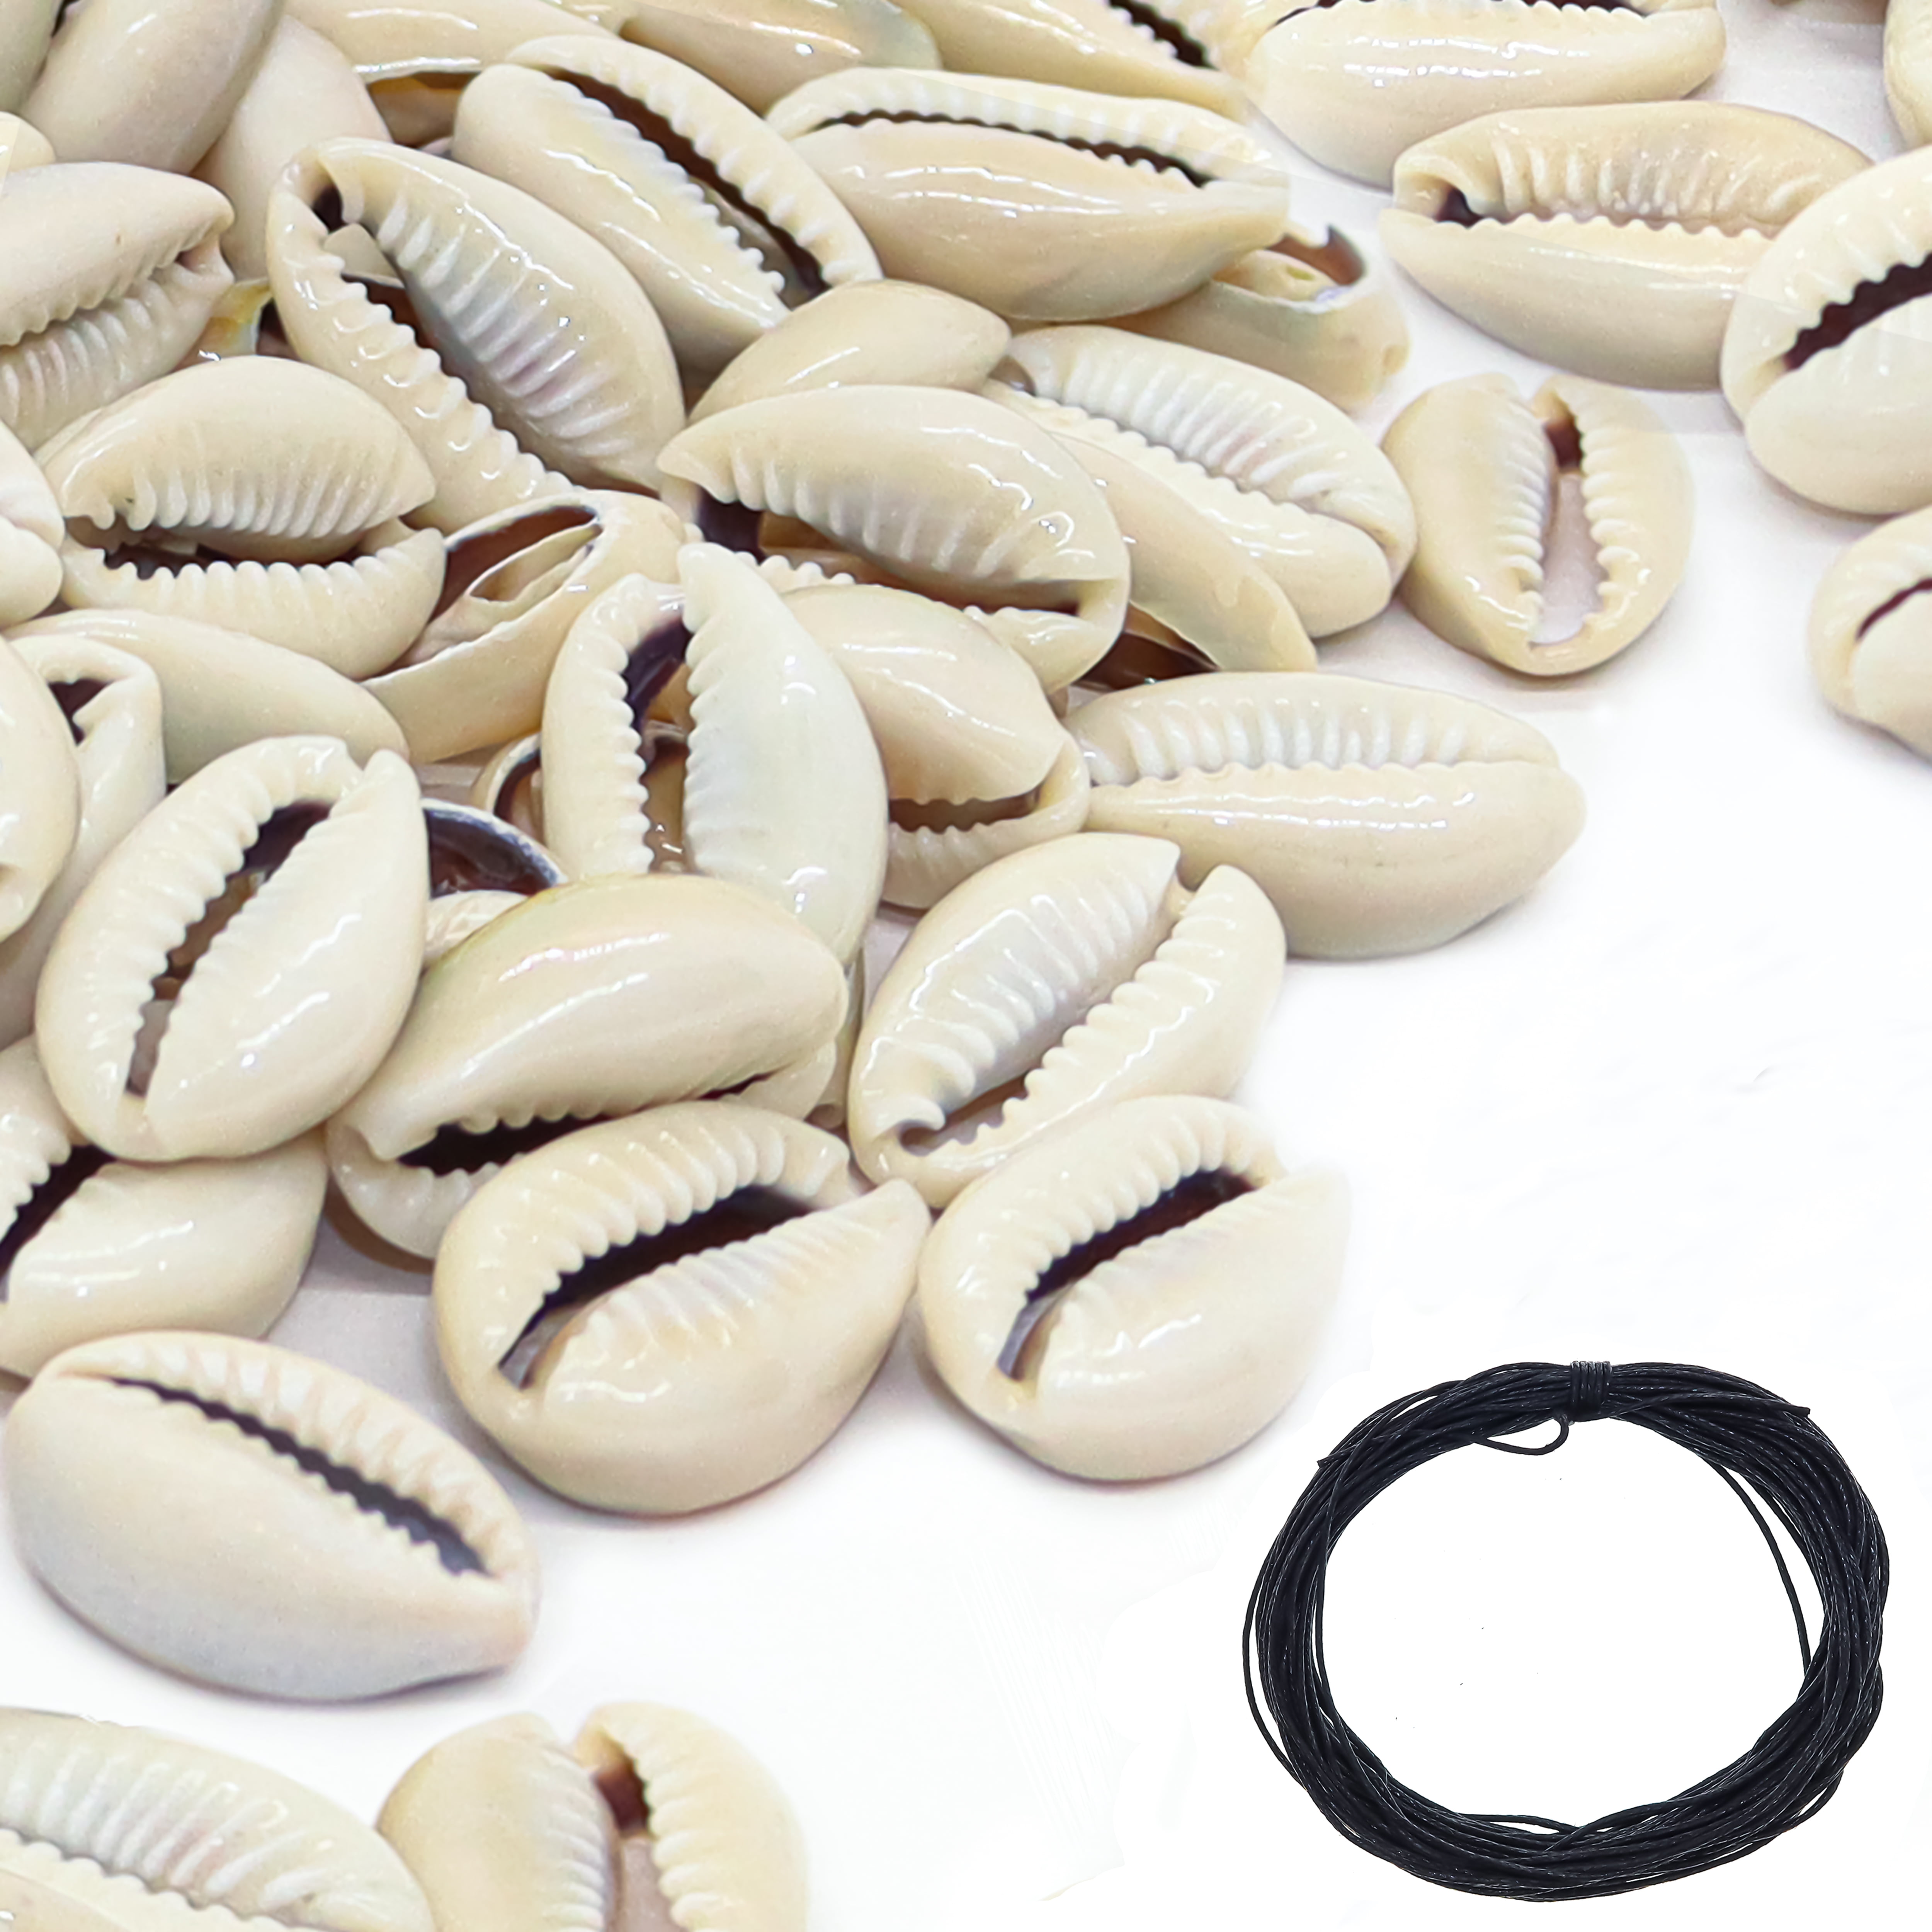 PCS DRILLED ASSORT TIGER COWRIE SEA SHELL BEADS CHARMS 1/2 LB #T-1945 350 